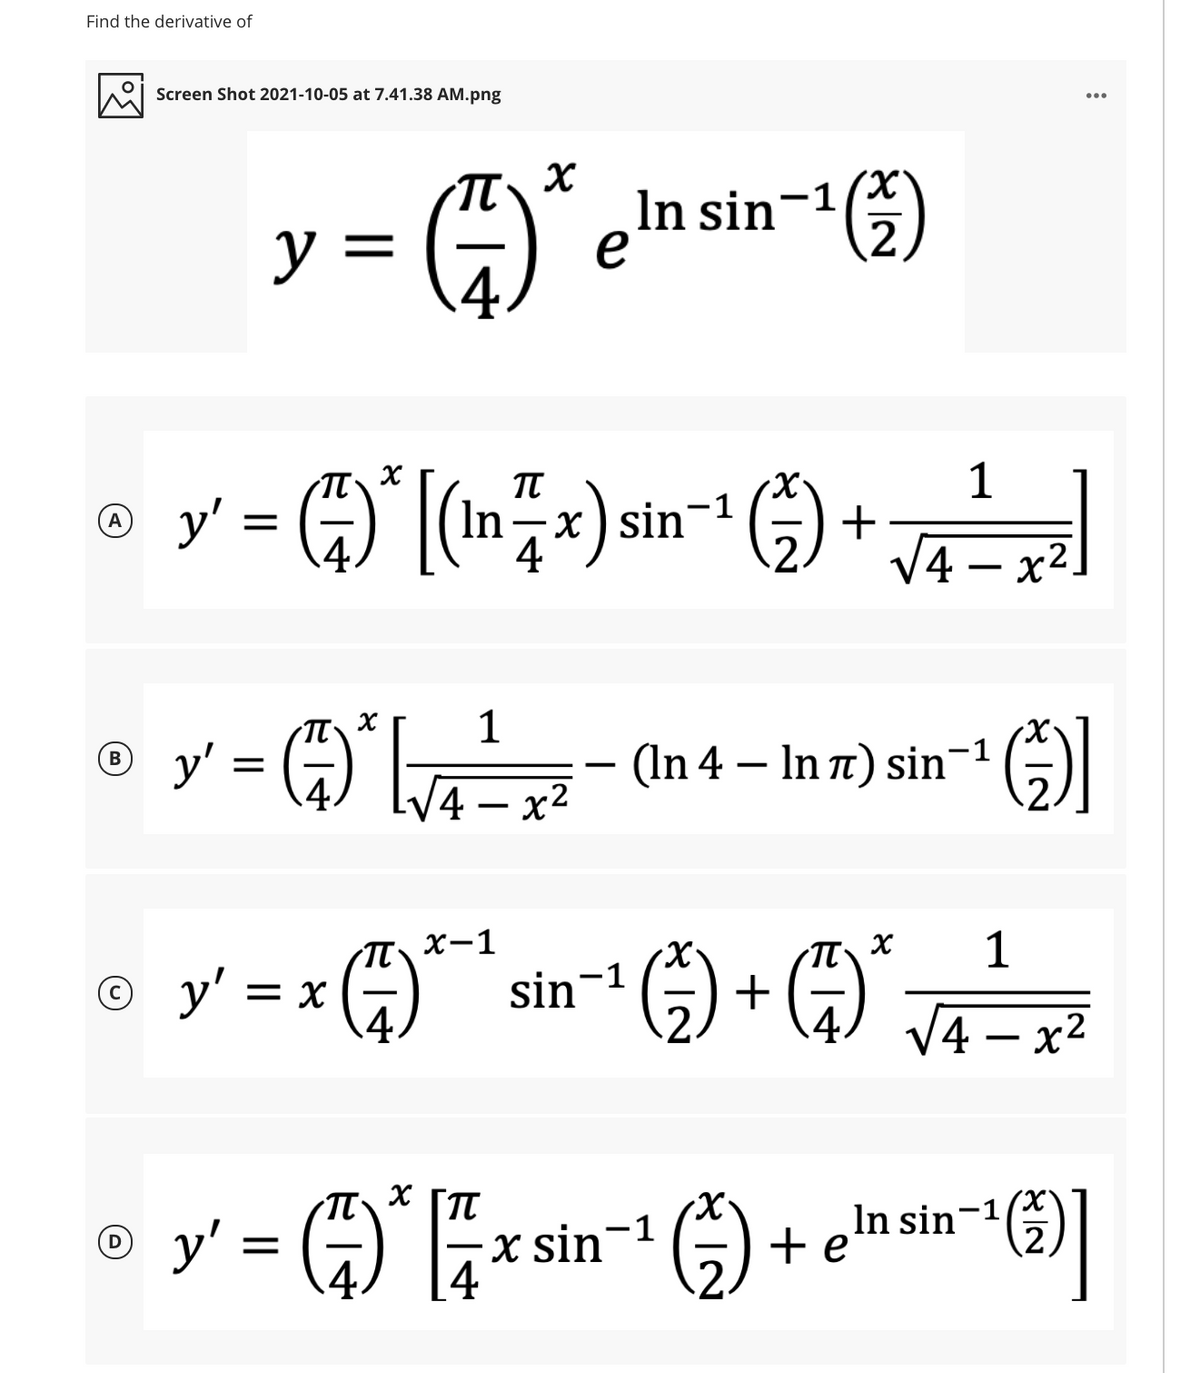 Find the derivative of
Screen Shot 2021-10-05 at 7.41.38 AM.png
y = ÷)
In sin-1(x
2.
1
o y' = 4)* (Inx):
+
V4 – x².
(A
-
o y = A*[
1
= G)
(In 4 – In t) sin¬1
-
4 — х2
1
sin-1 -) + (4)
T x-1
y' = x 4)
X.
4 – x2
-
o y' = )*
X.
In sin-1
+e
-1
x sin
4
2.
4.
